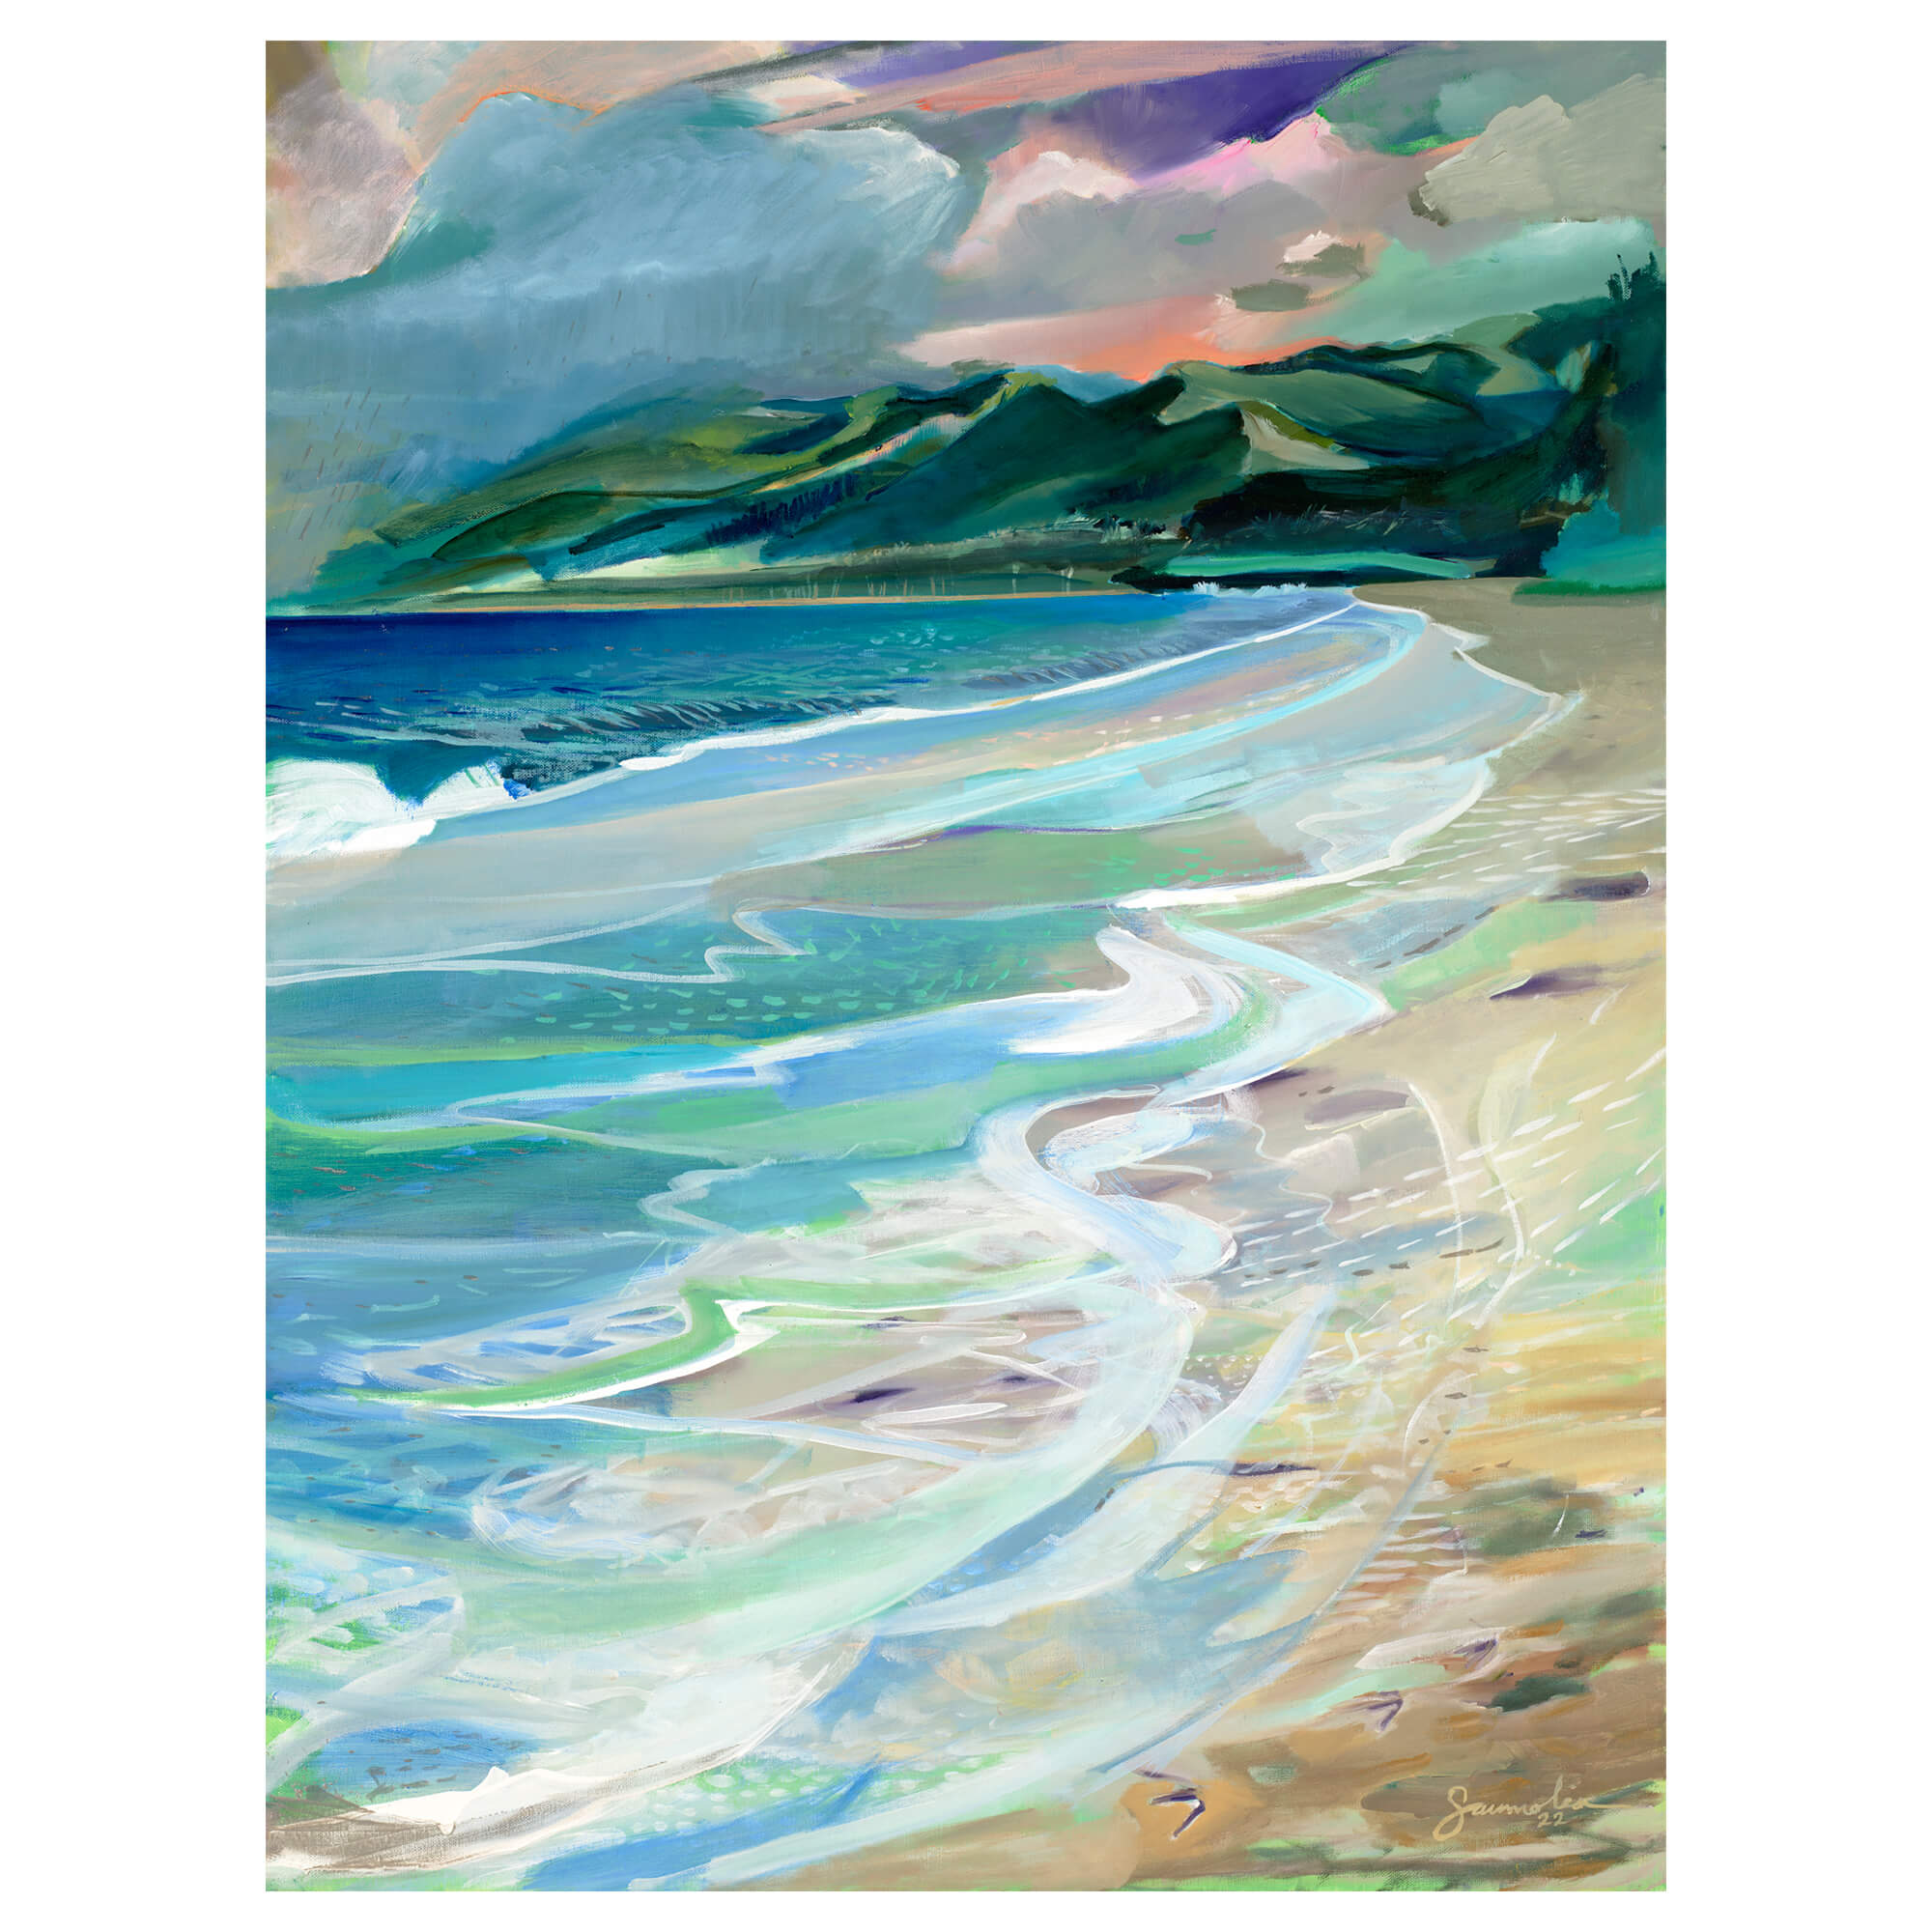 A matted art print featuring a beautiful abstract landscape with crashing waves and distant mountains by popular Hawaii artist Saumolia Puapuaga